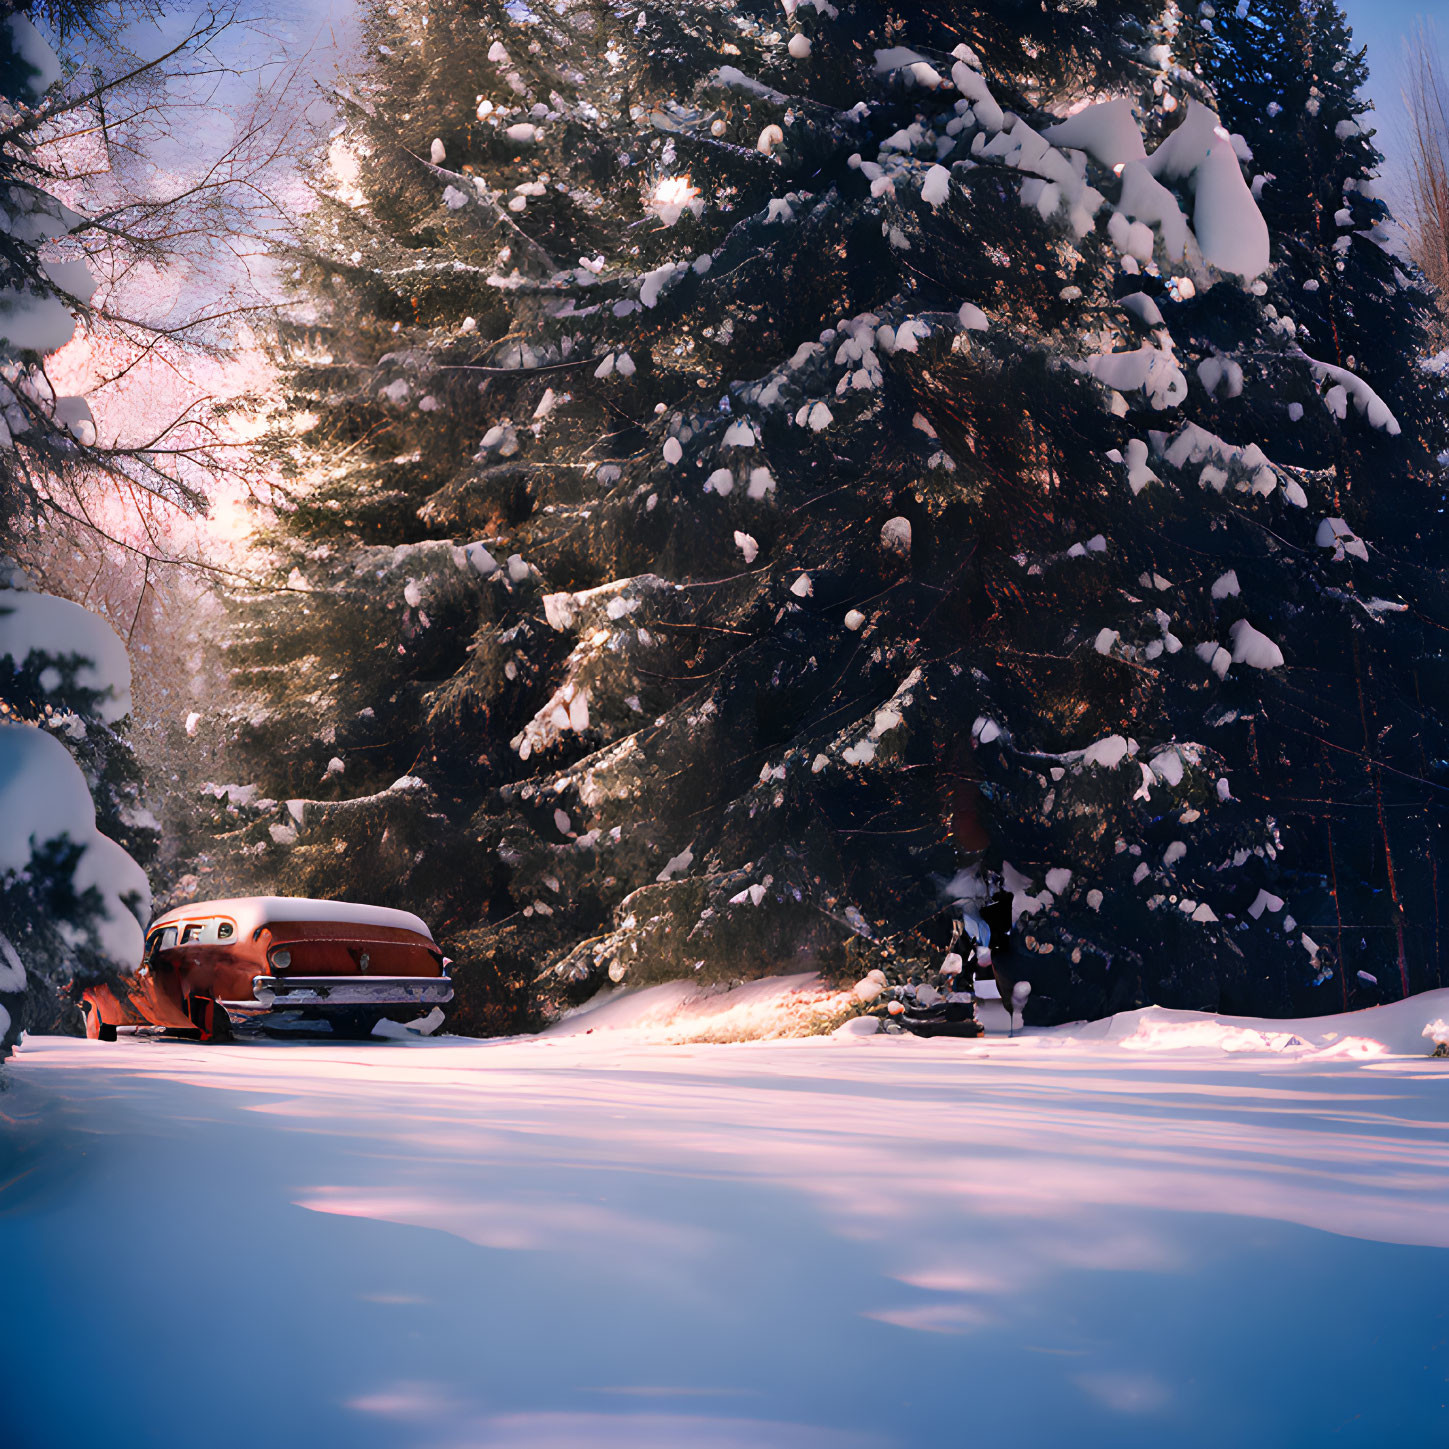 Vintage car parked in snowy forest with sunlight filtering through pine trees